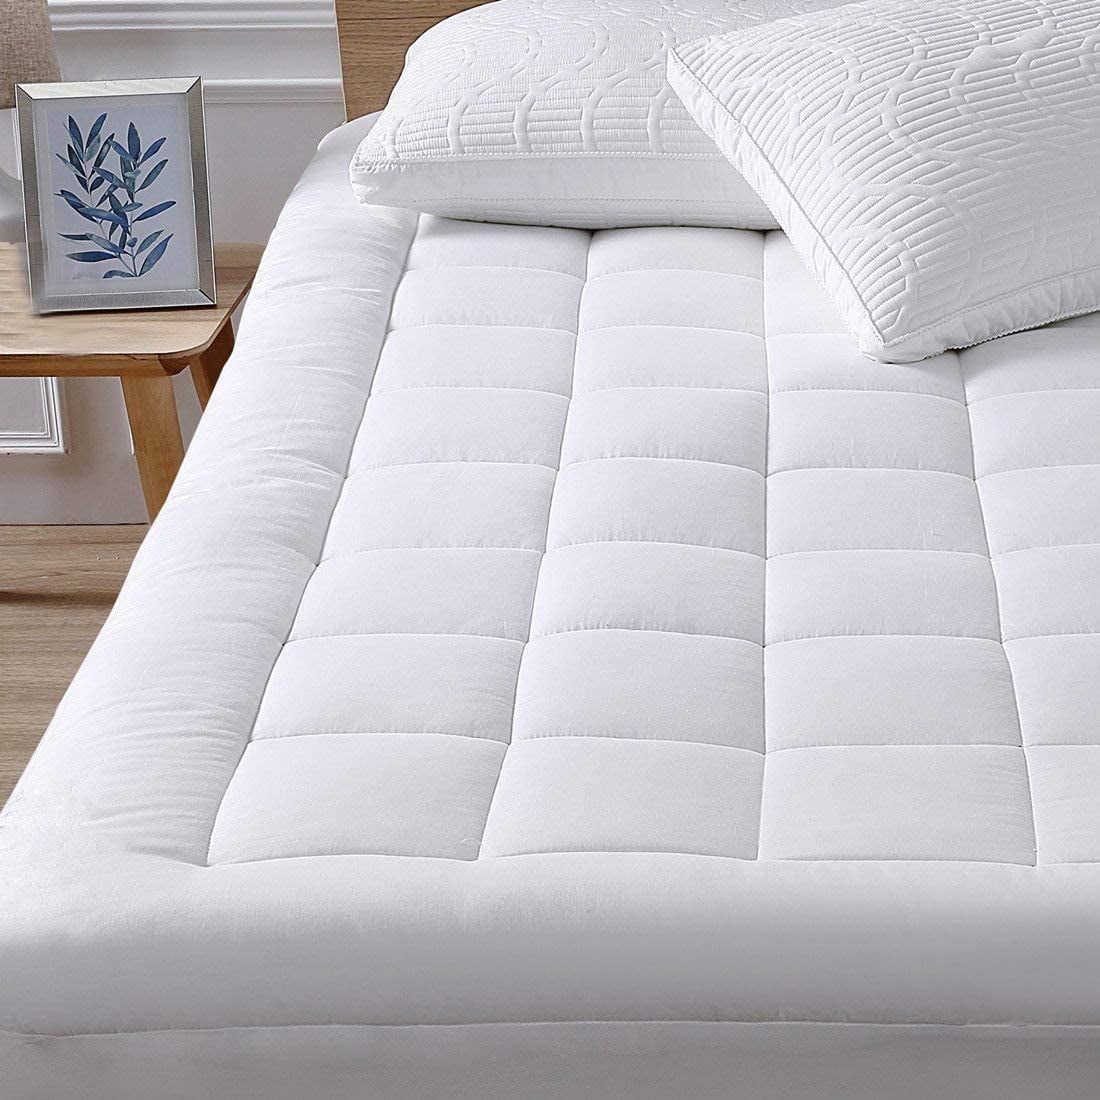 King 200cm MEWAY Quilted Mattress Pad-Hypoallergenic Microfiber Mattress topper protector 150